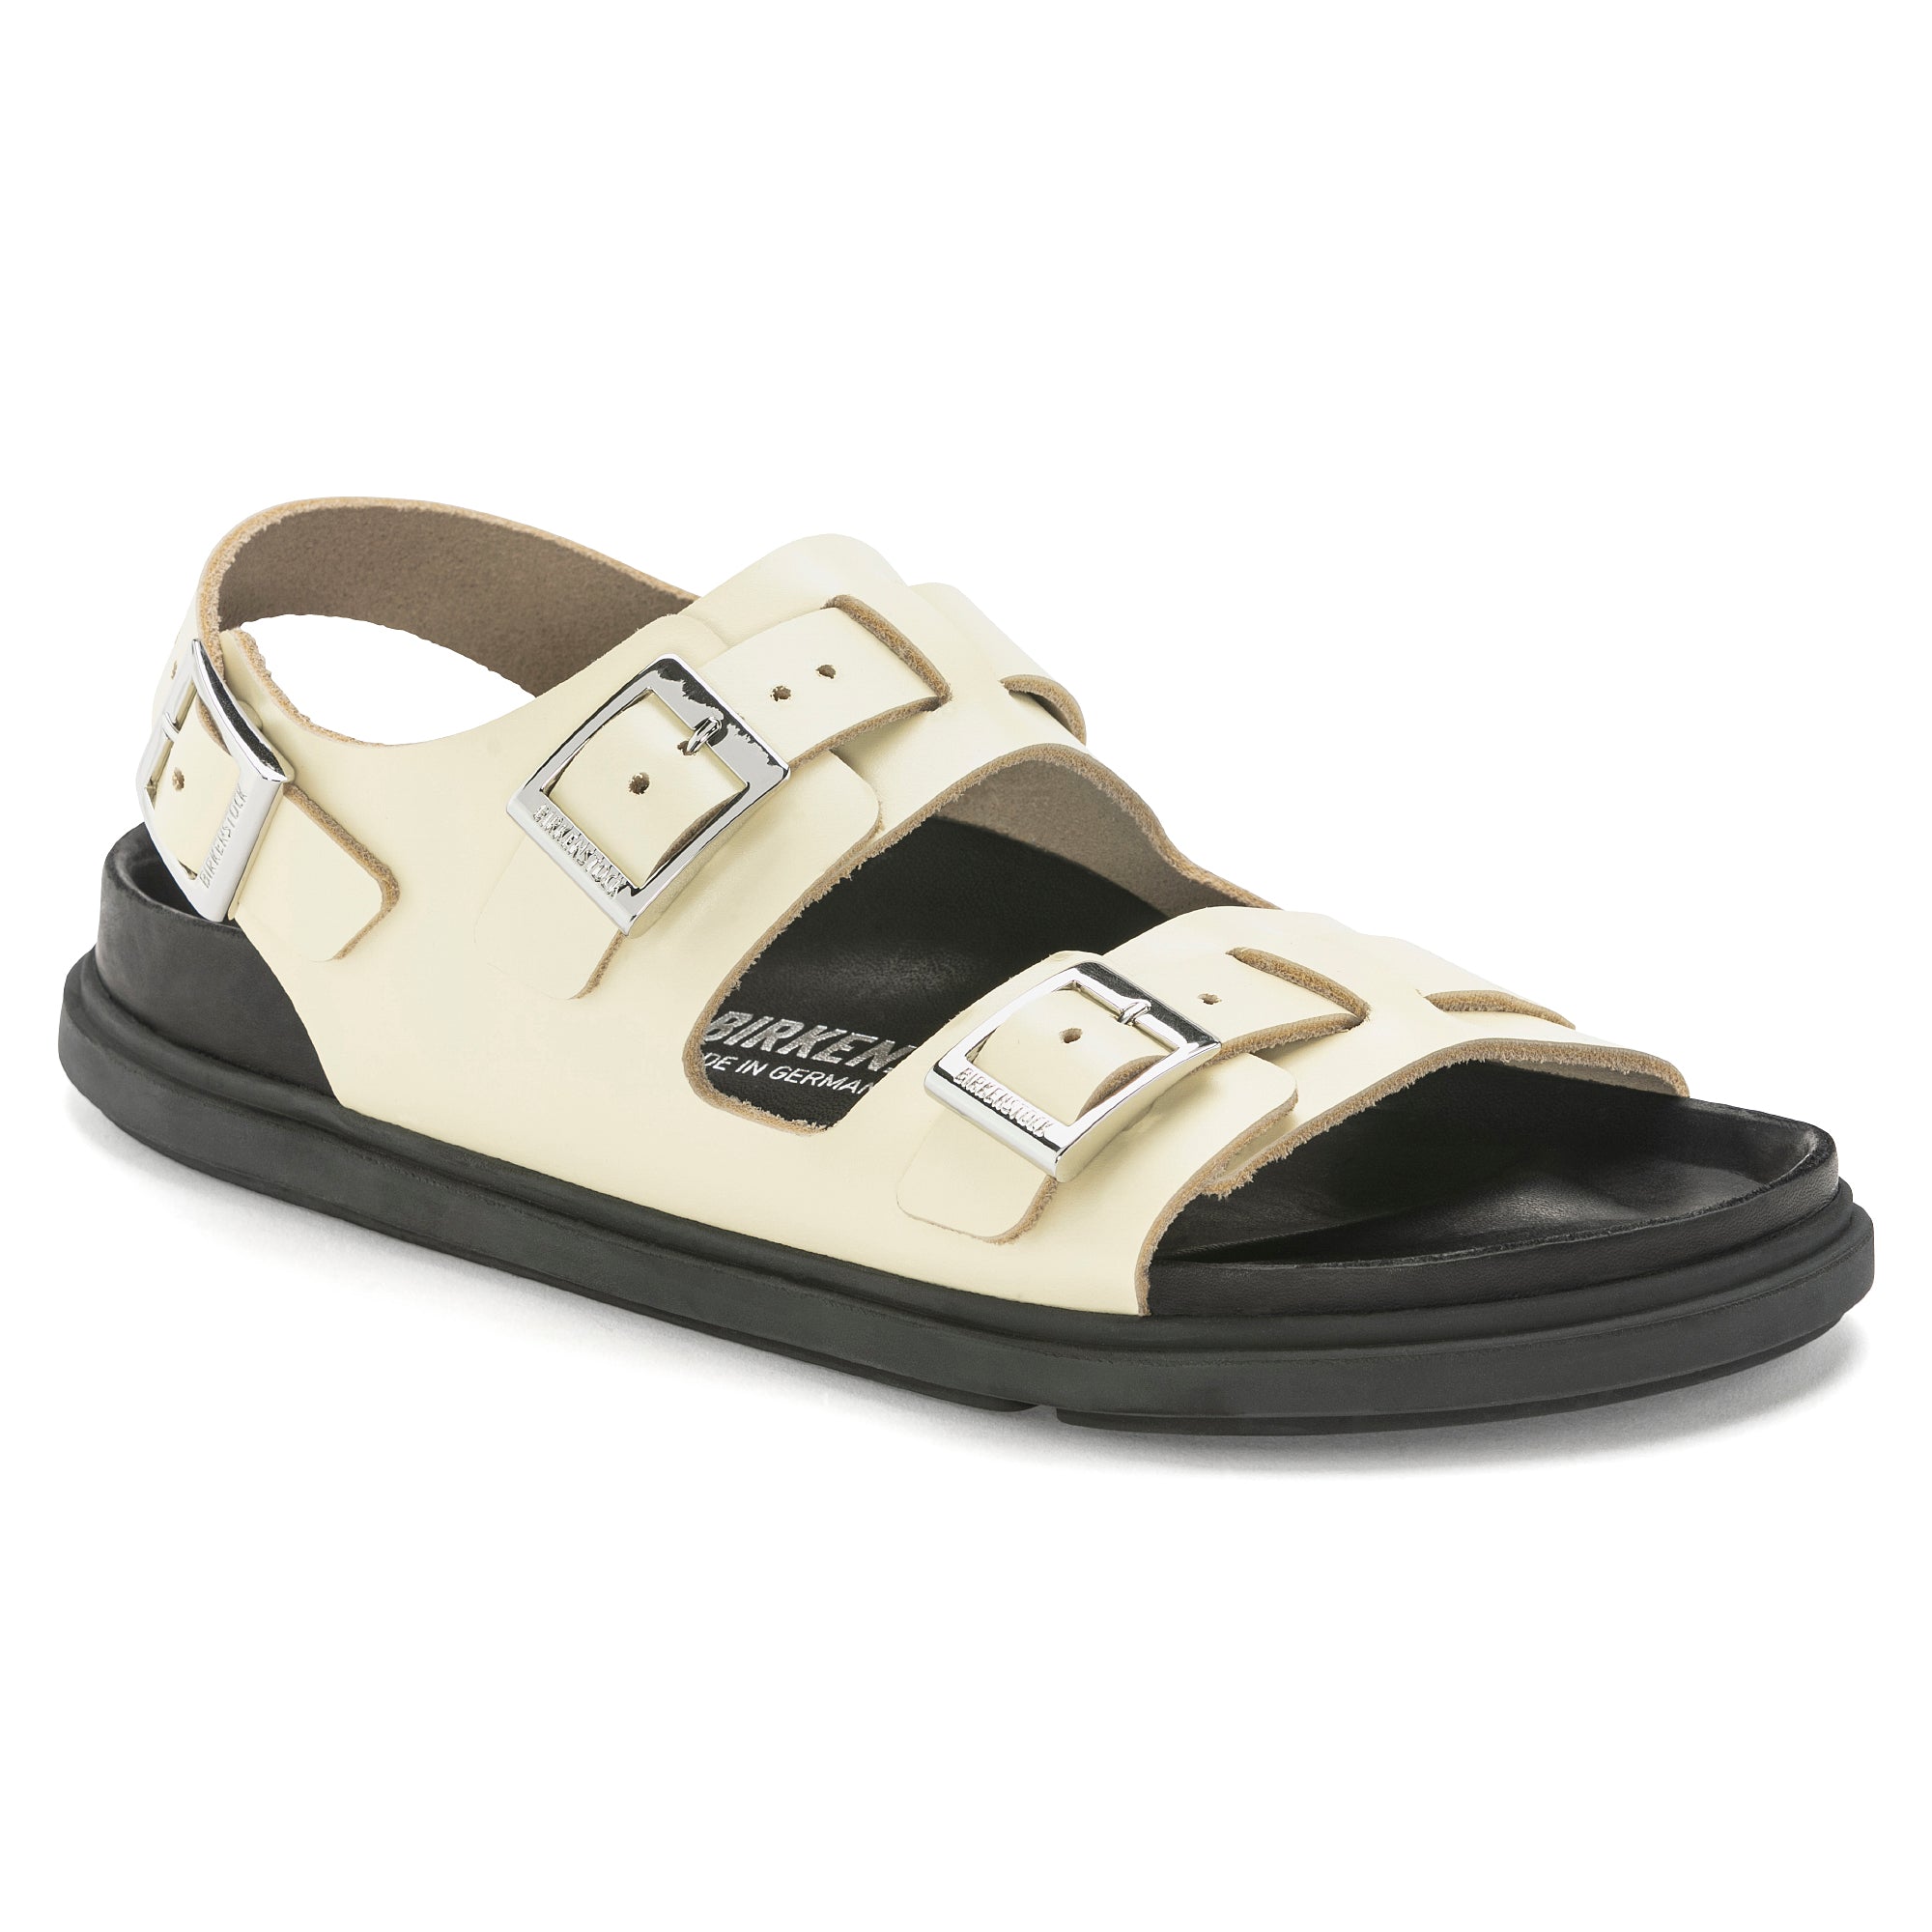 Birkenstock Cannes Exquisite Butter,natural Leather-calz.s Donna - 1